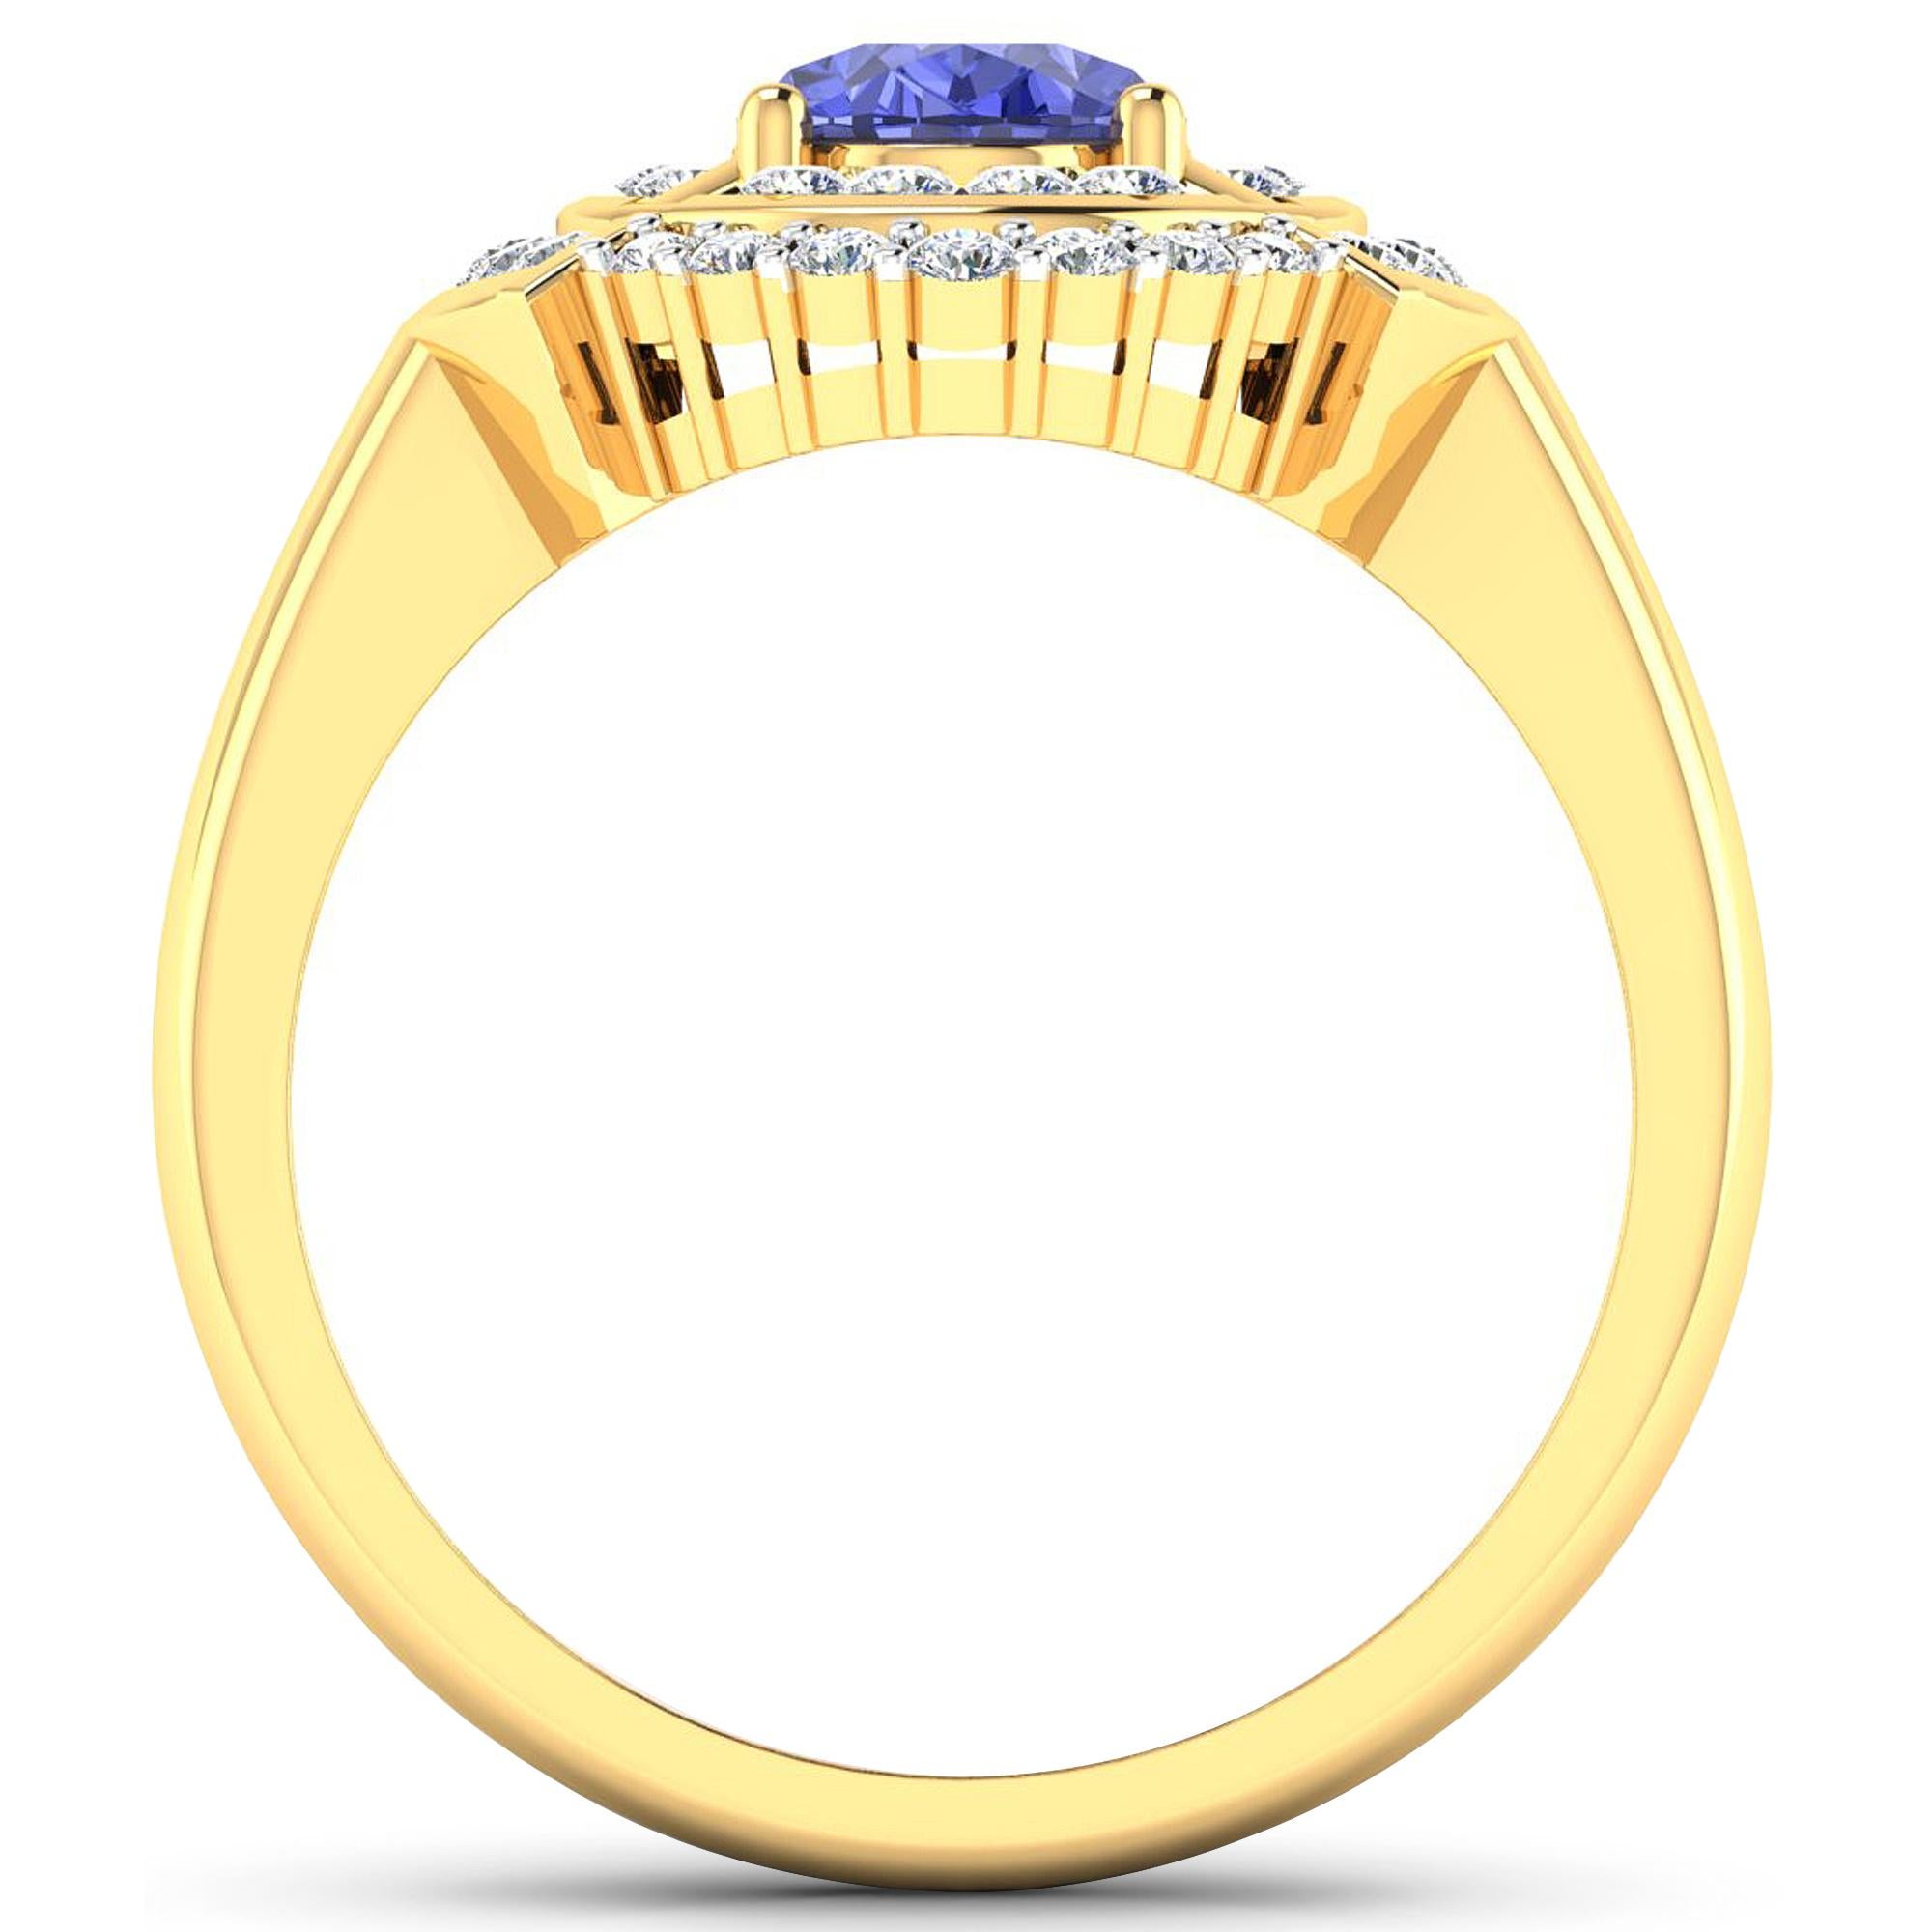 Tanzanite Gold Ring, 14Kt Gold Tanzanite & Diamond Engagement Ring, 1.62ctw.

Flaunt yourself with this 14K Yellow Gold Tanzanite & White Diamond Engagement Ring. The setting is inlaid with 38 accented full-cut White Diamond round stones for a total